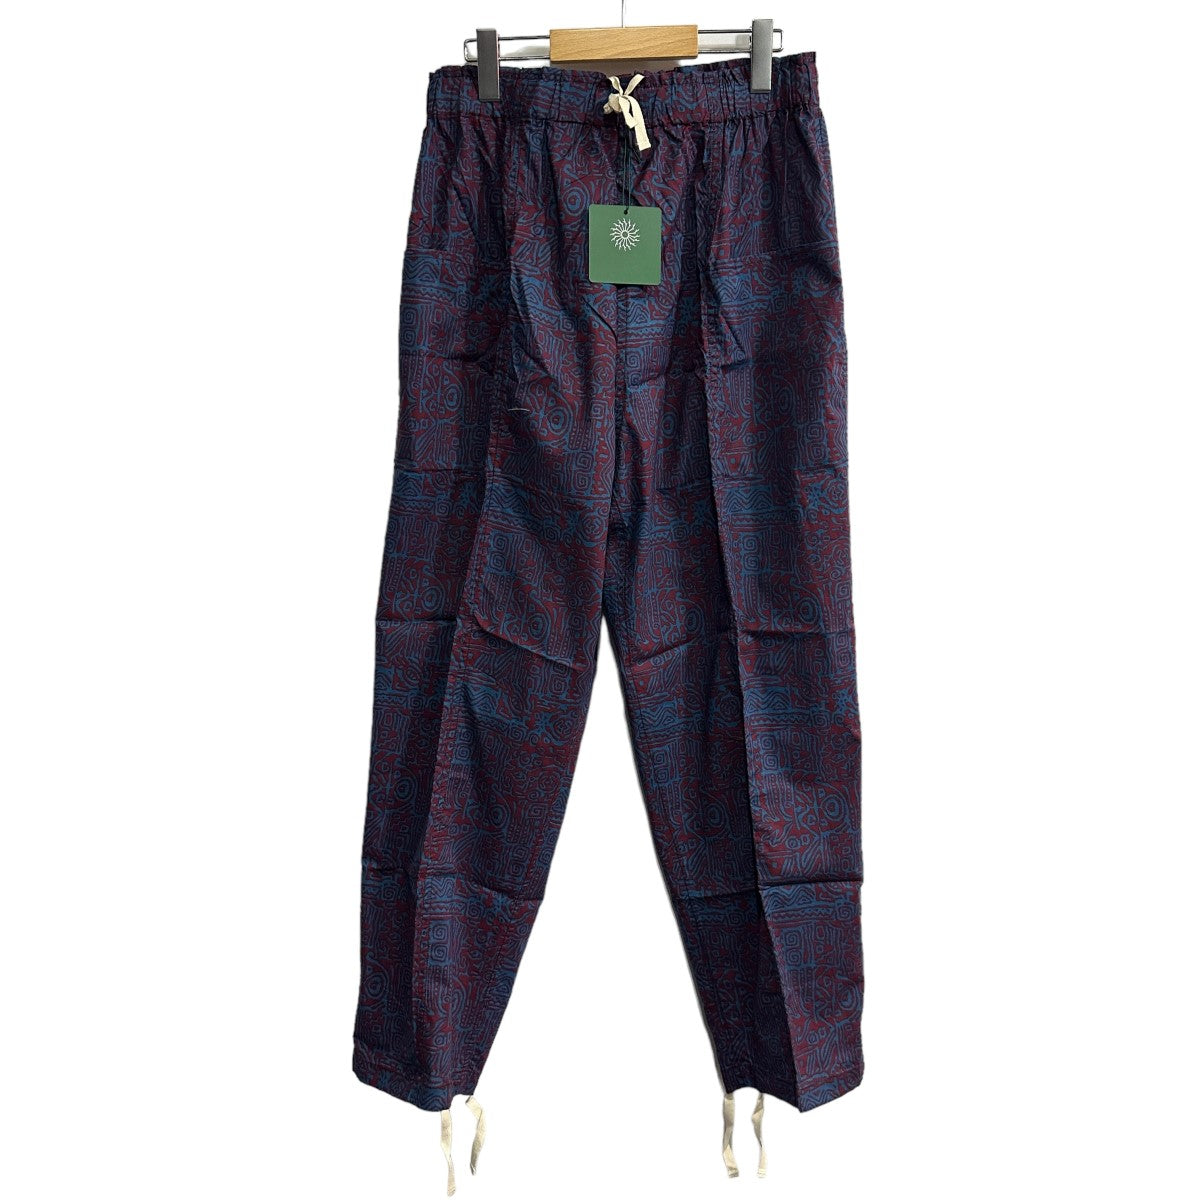 SOUTH2 WEST8(サウスツーウエストエイト) 22SS Army String Pant ...